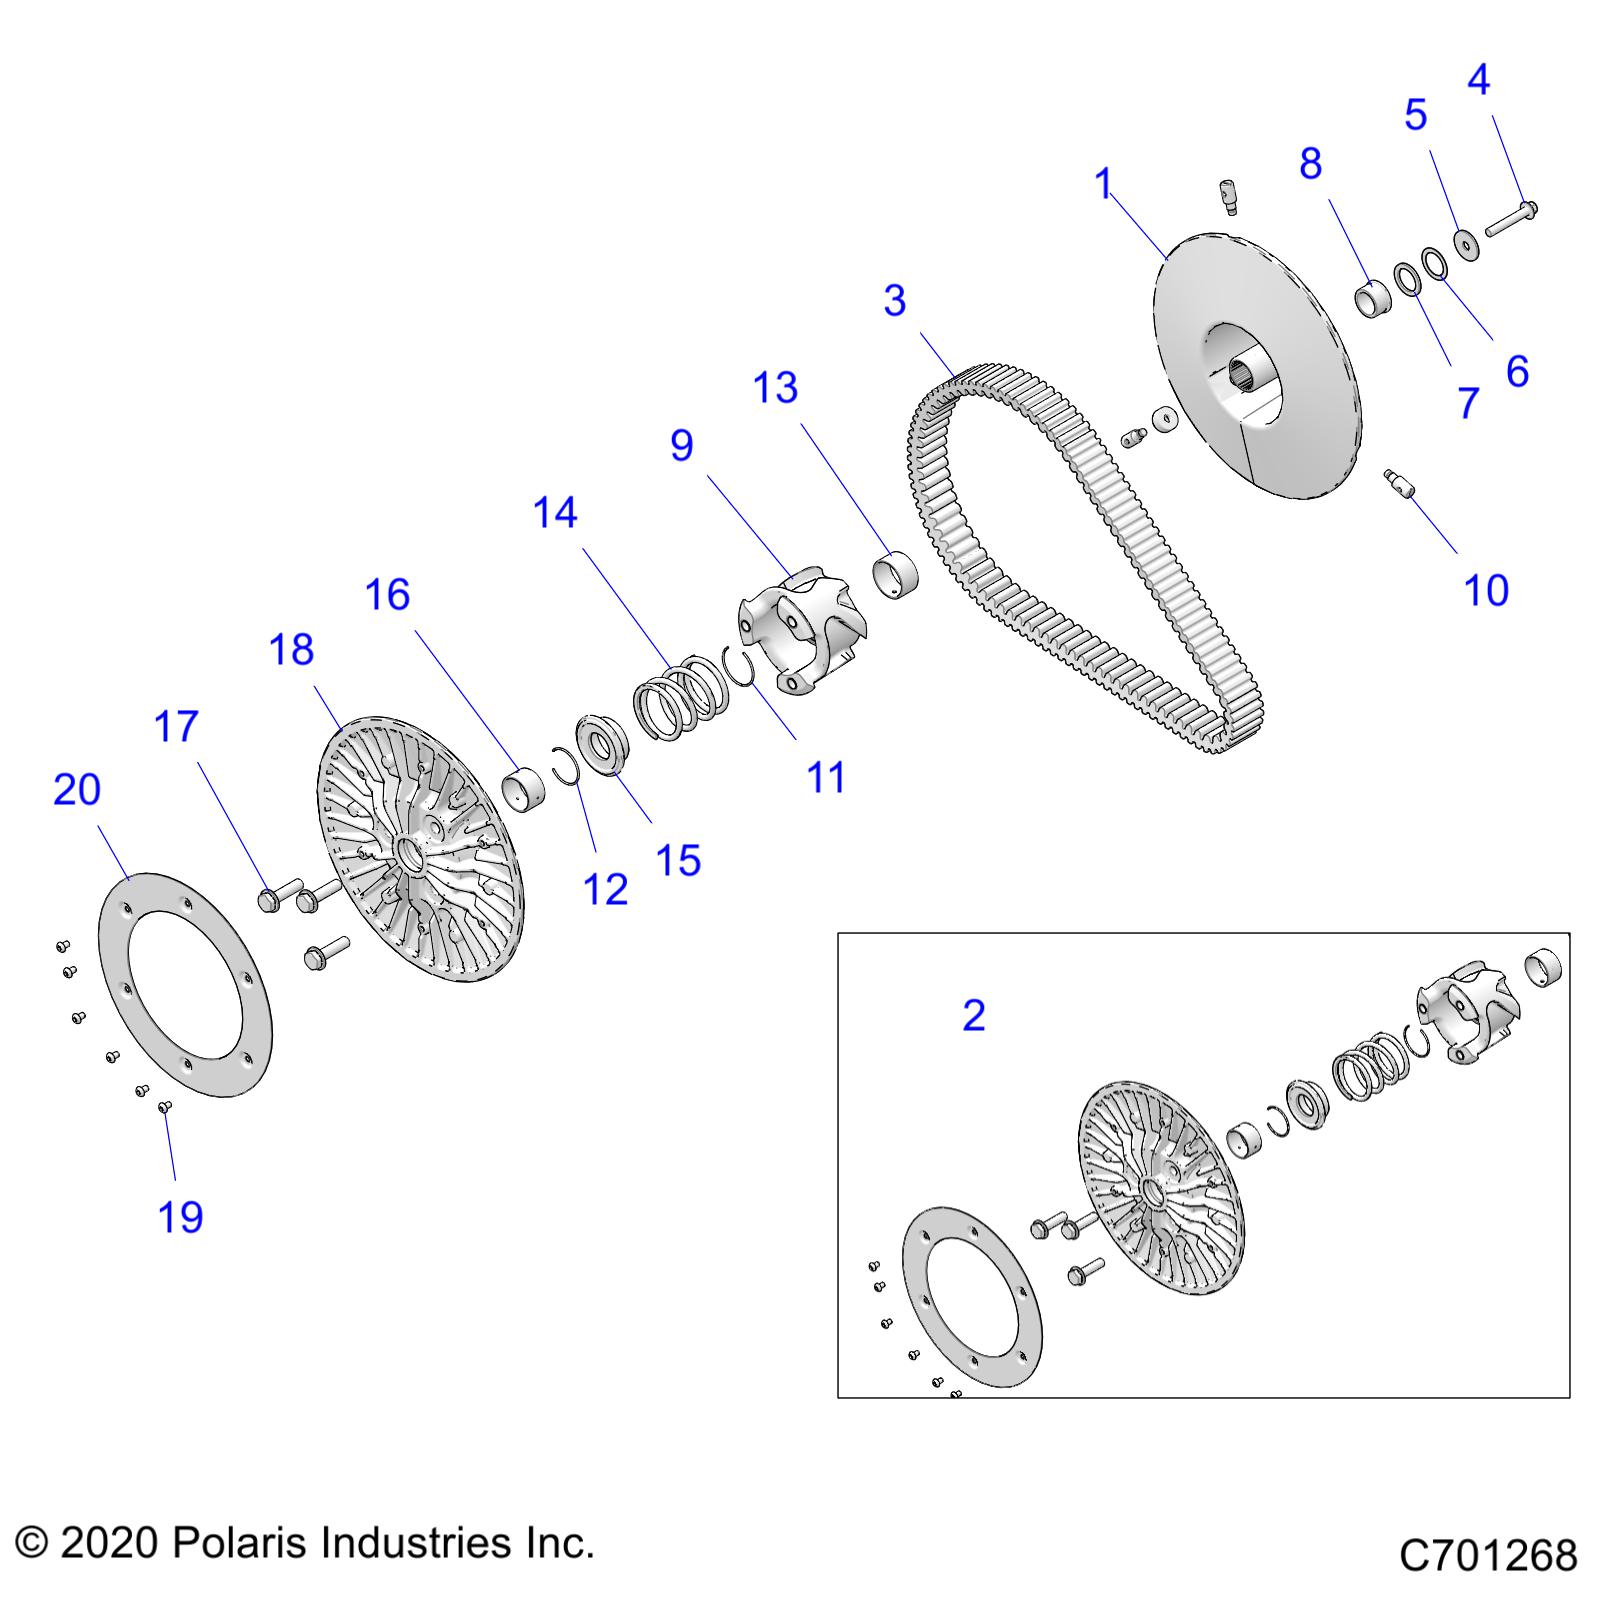 Part Number : 7044761 DRIVEN SPRING